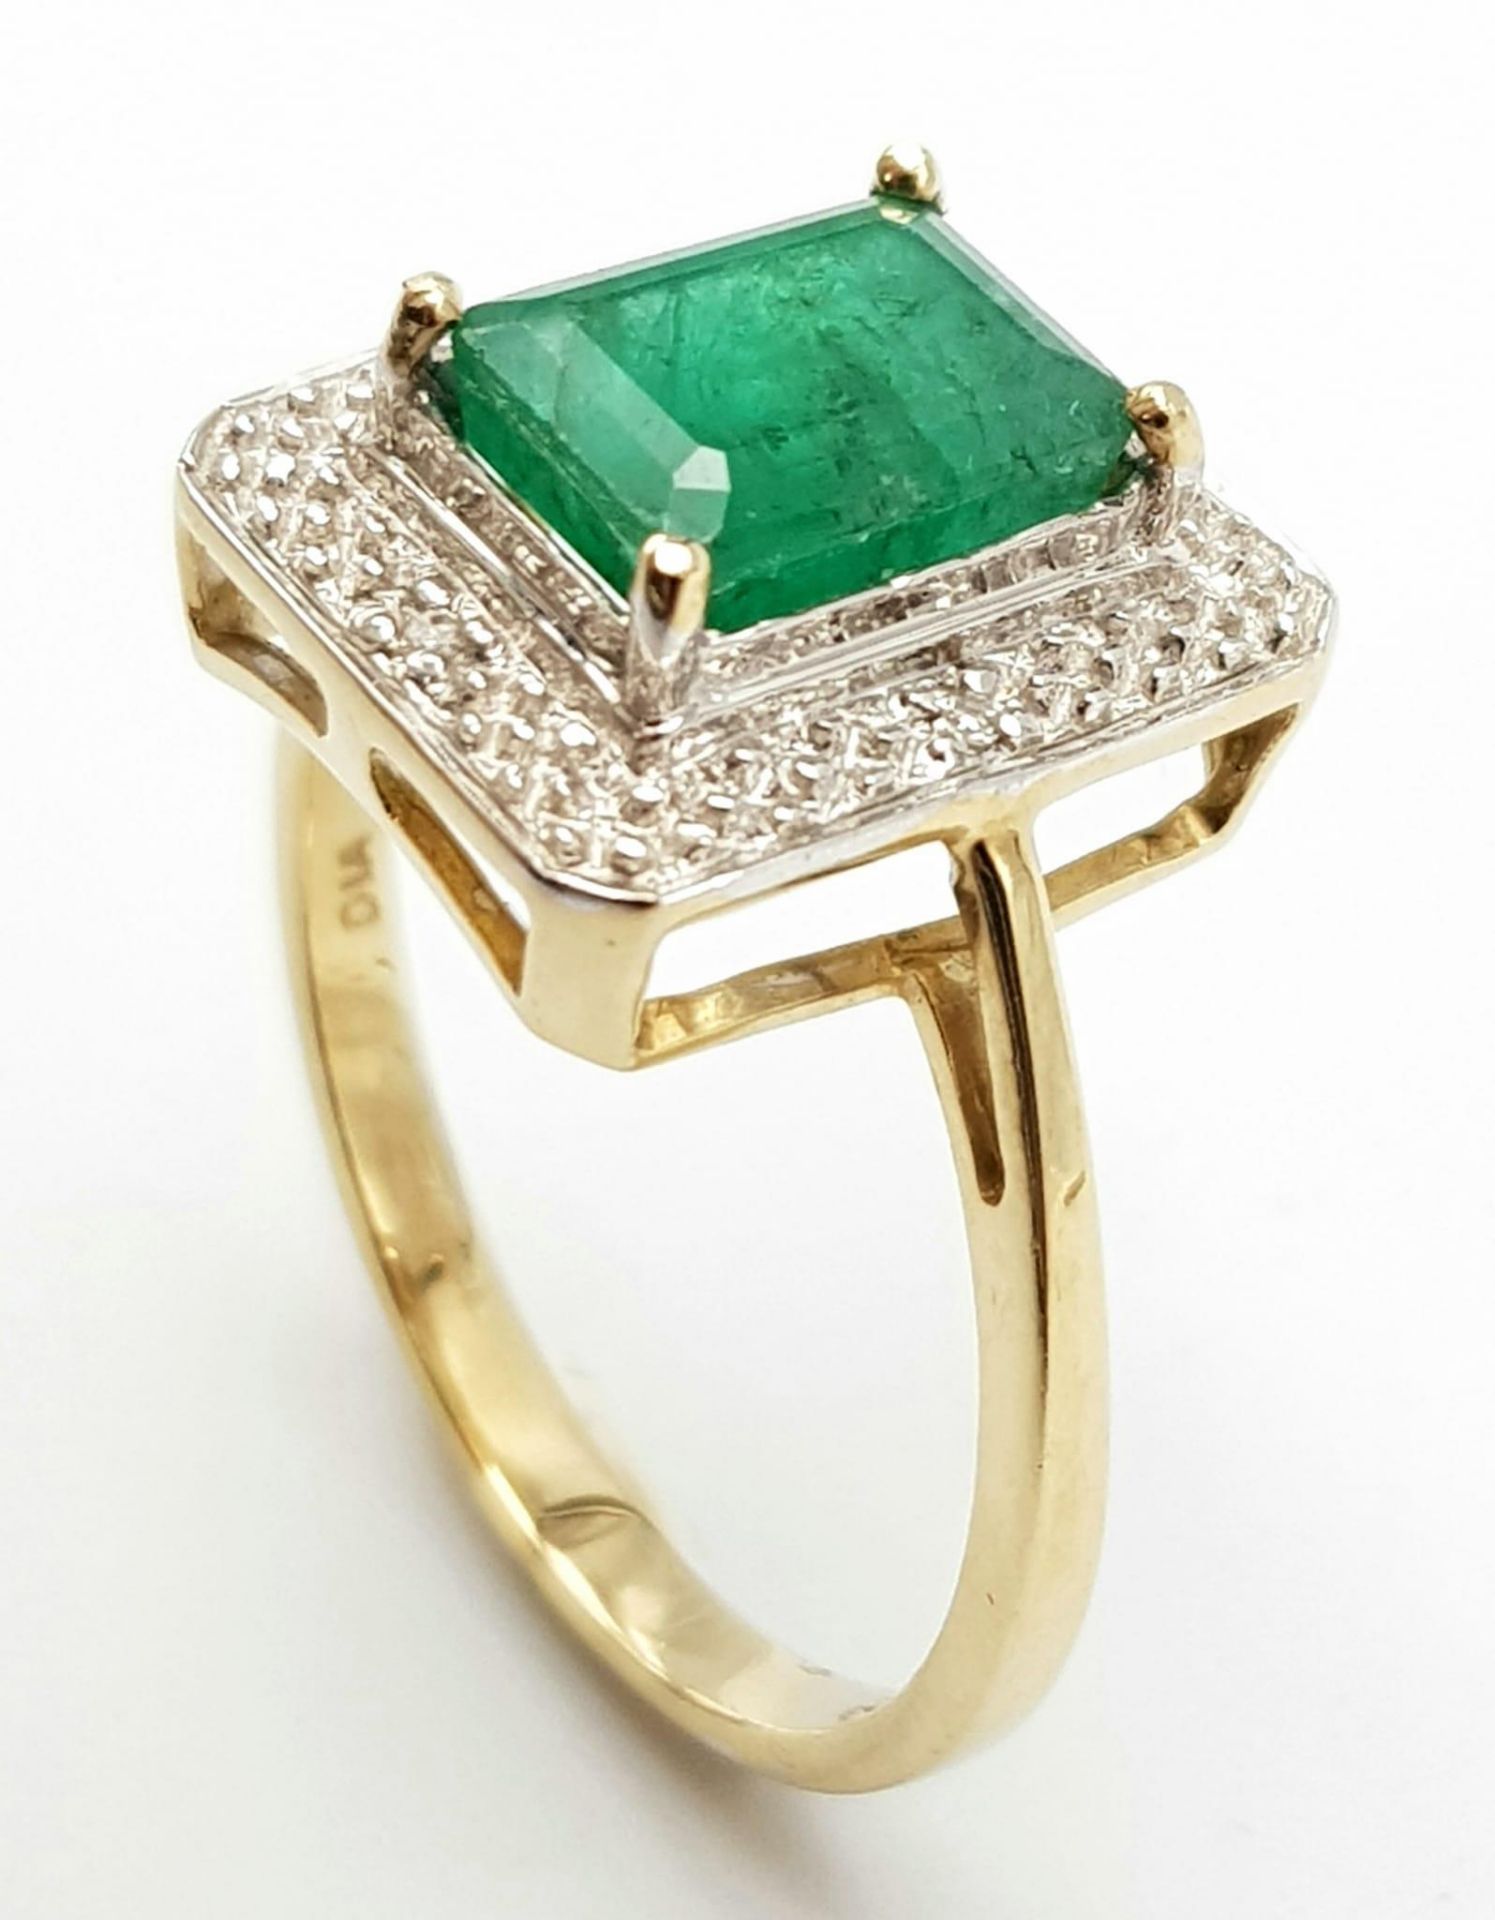 A 9K GOLD RING WITH 2.5ct NATURAL EMERALD SURROUNDED BY DIAMONDS. 3.8gms size O - Image 3 of 5